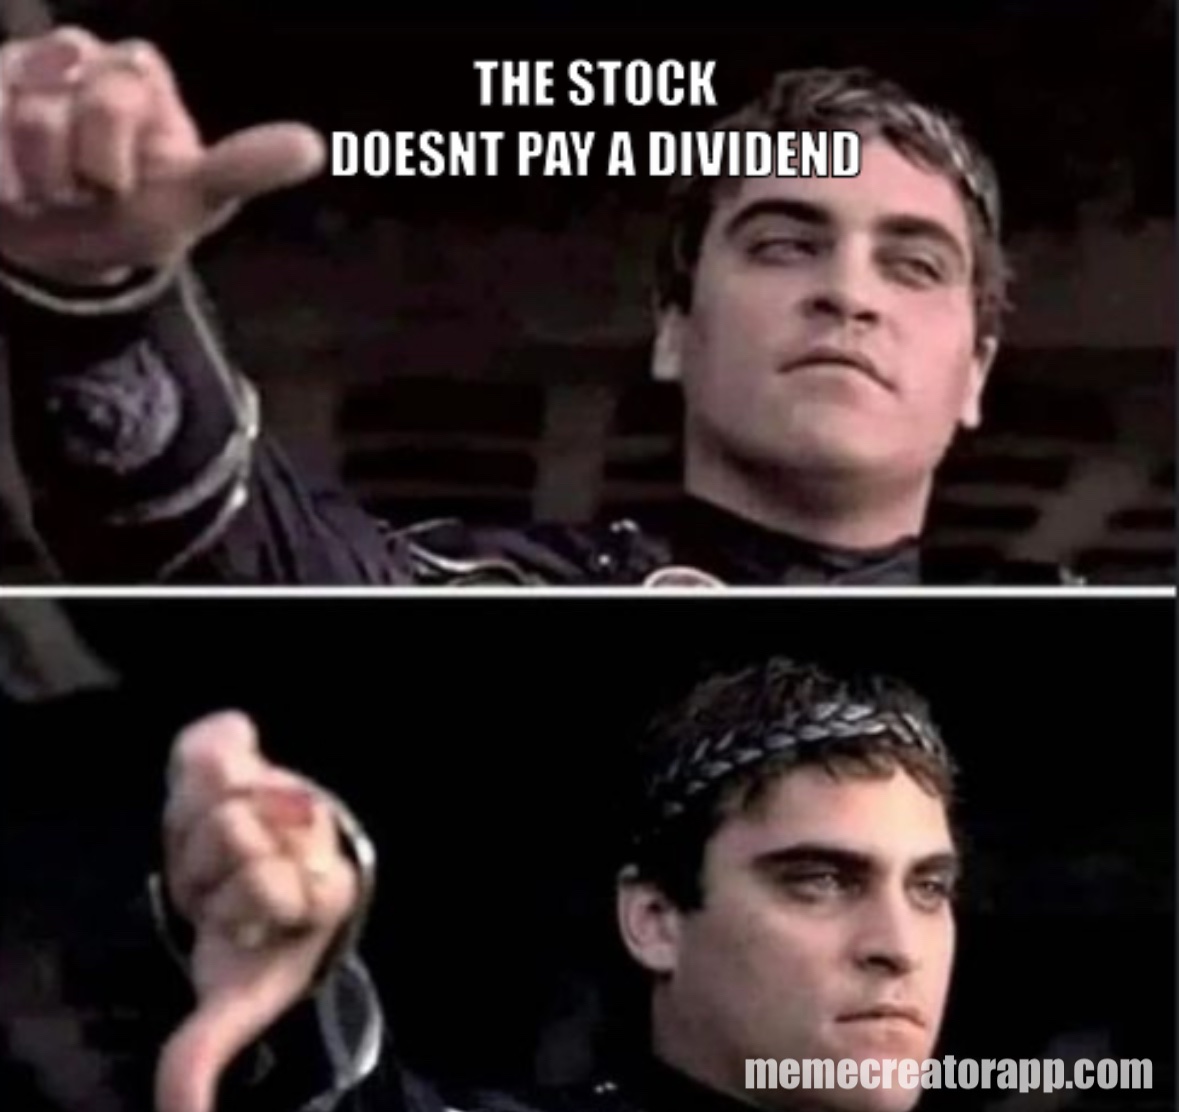 Me when looking at stocks to buy.